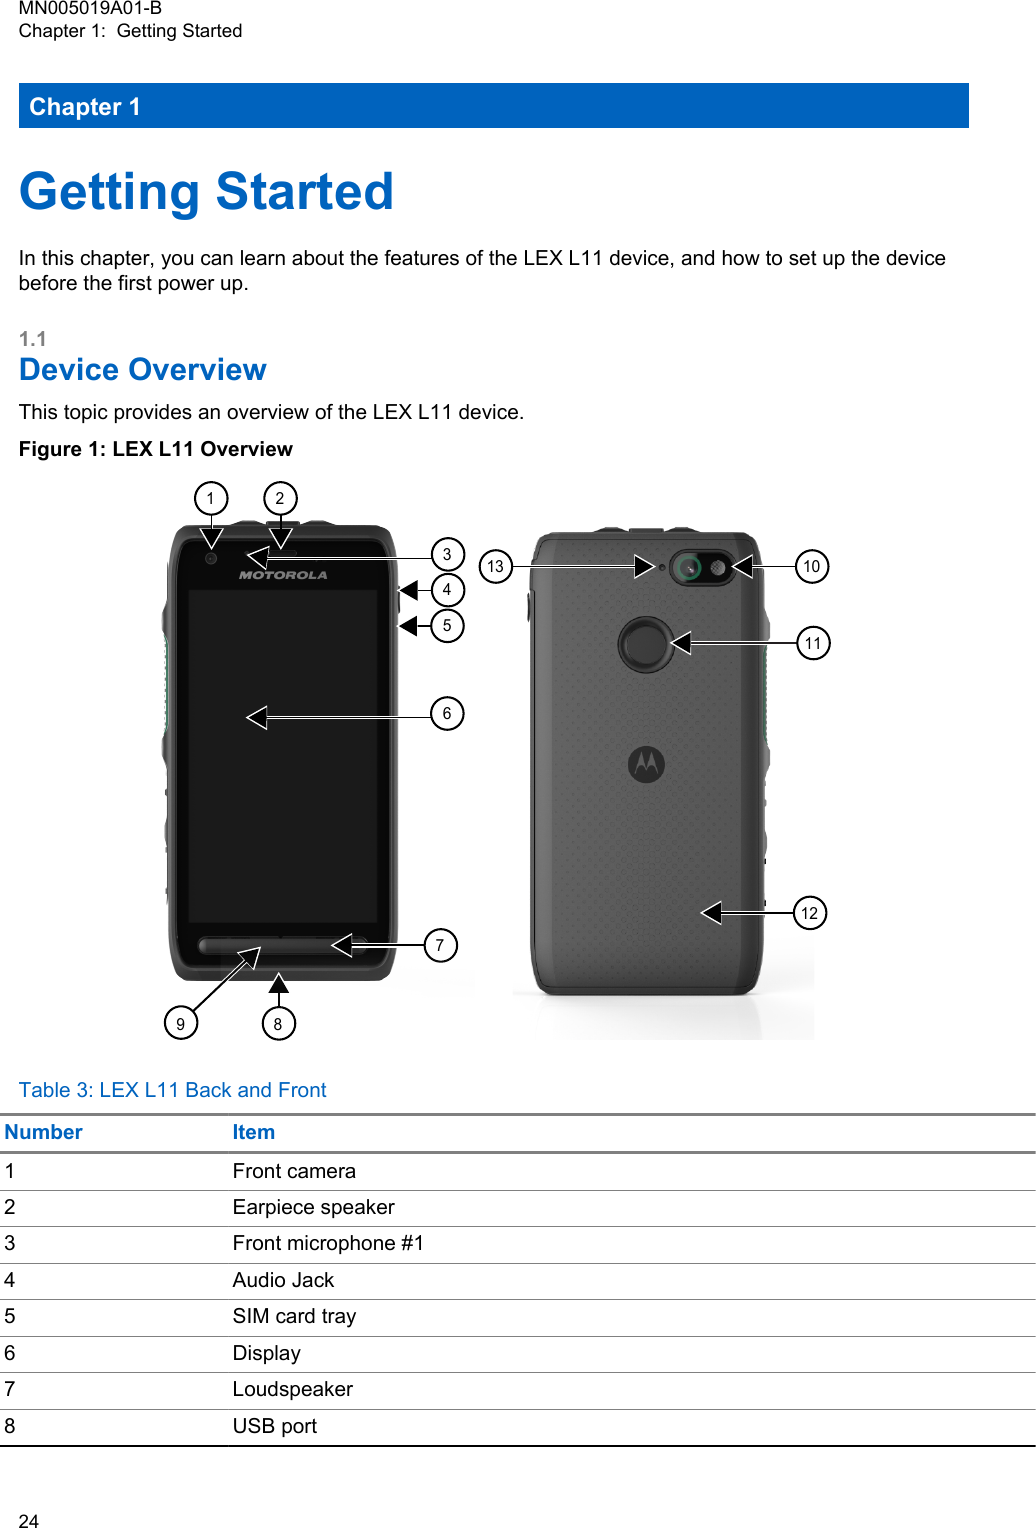 Chapter 1Getting StartedIn this chapter, you can learn about the features of the LEX L11 device, and how to set up the devicebefore the first power up.1.1Device OverviewThis topic provides an overview of the LEX L11 device.Figure 1: LEX L11 Overview1 2345678912101311Table 3: LEX L11 Back and FrontNumber Item1 Front camera2 Earpiece speaker3 Front microphone #14 Audio Jack5 SIM card tray6 Display7 Loudspeaker8 USB portMN005019A01-BChapter 1:  Getting Started24  